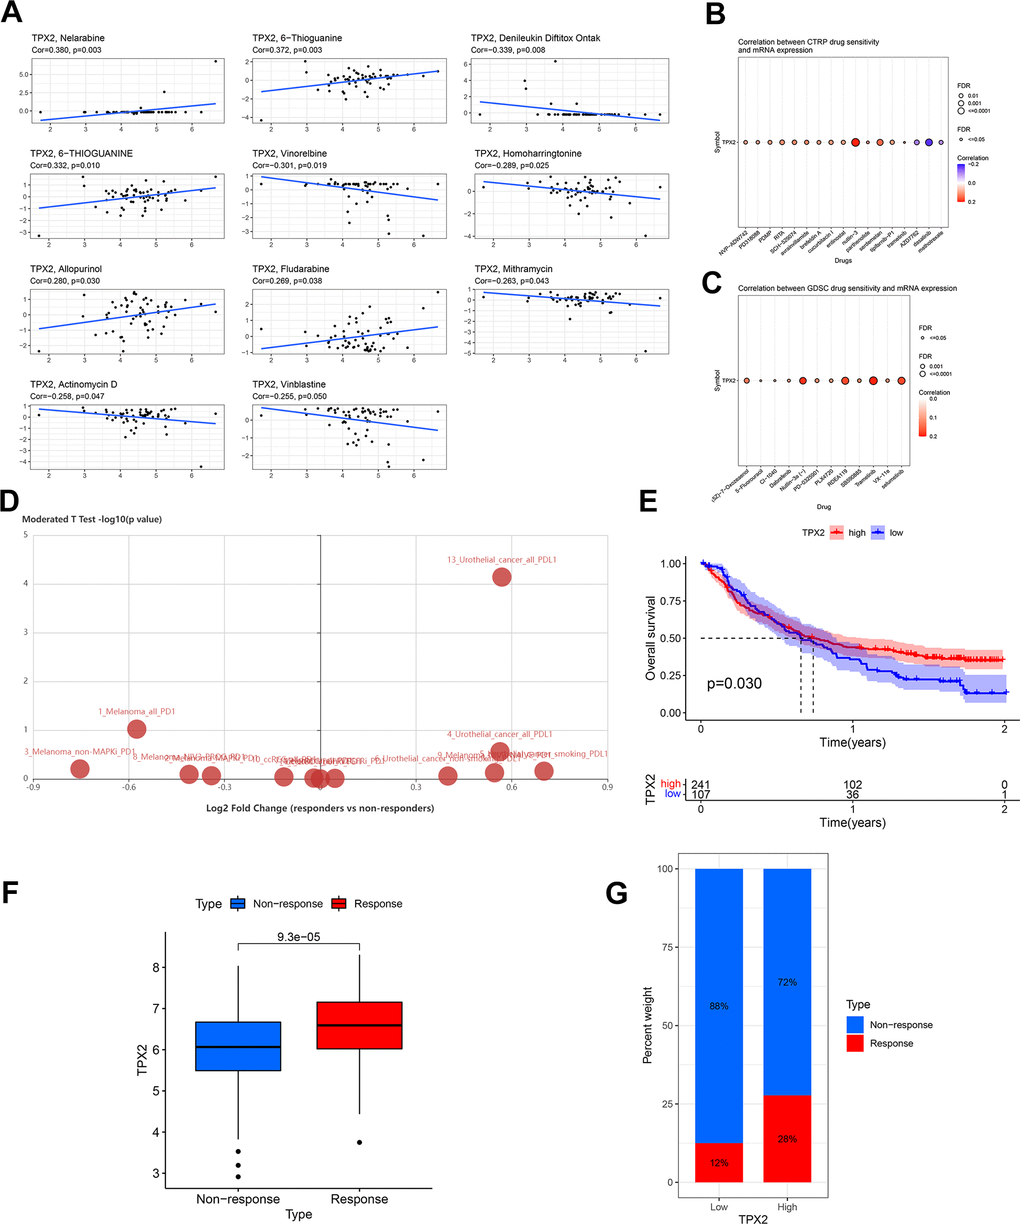 Drug sensitivity analysis and validation of the immunotherapeutic predictive value of TPX2. (A) Drug sensitivity analysis of TPX2 using the CellMiner database. (B) Correlation between CTRP drug sensitivity and TPX2 expression. (C) Correlation between GDSC drug sensitivity and TPX2 expression. Red dots indicate positive association. Blue dots indicate negative association. (D) Difference in expression of TPX2 between responders and non-responders undergoing anti-PD1/PD-L1 therapy using the TISIDB database. (E) Kaplan-Meier OS curves for TPX2 in IMvigor 210. (F) TPX2 expression was higher in responders than that in non-responders in IMvigor 210. (G) Treatment response rates with anti-PD-L1 therapy in patients with high and low expressions of TPX2 in IMvigor 210. p-value 